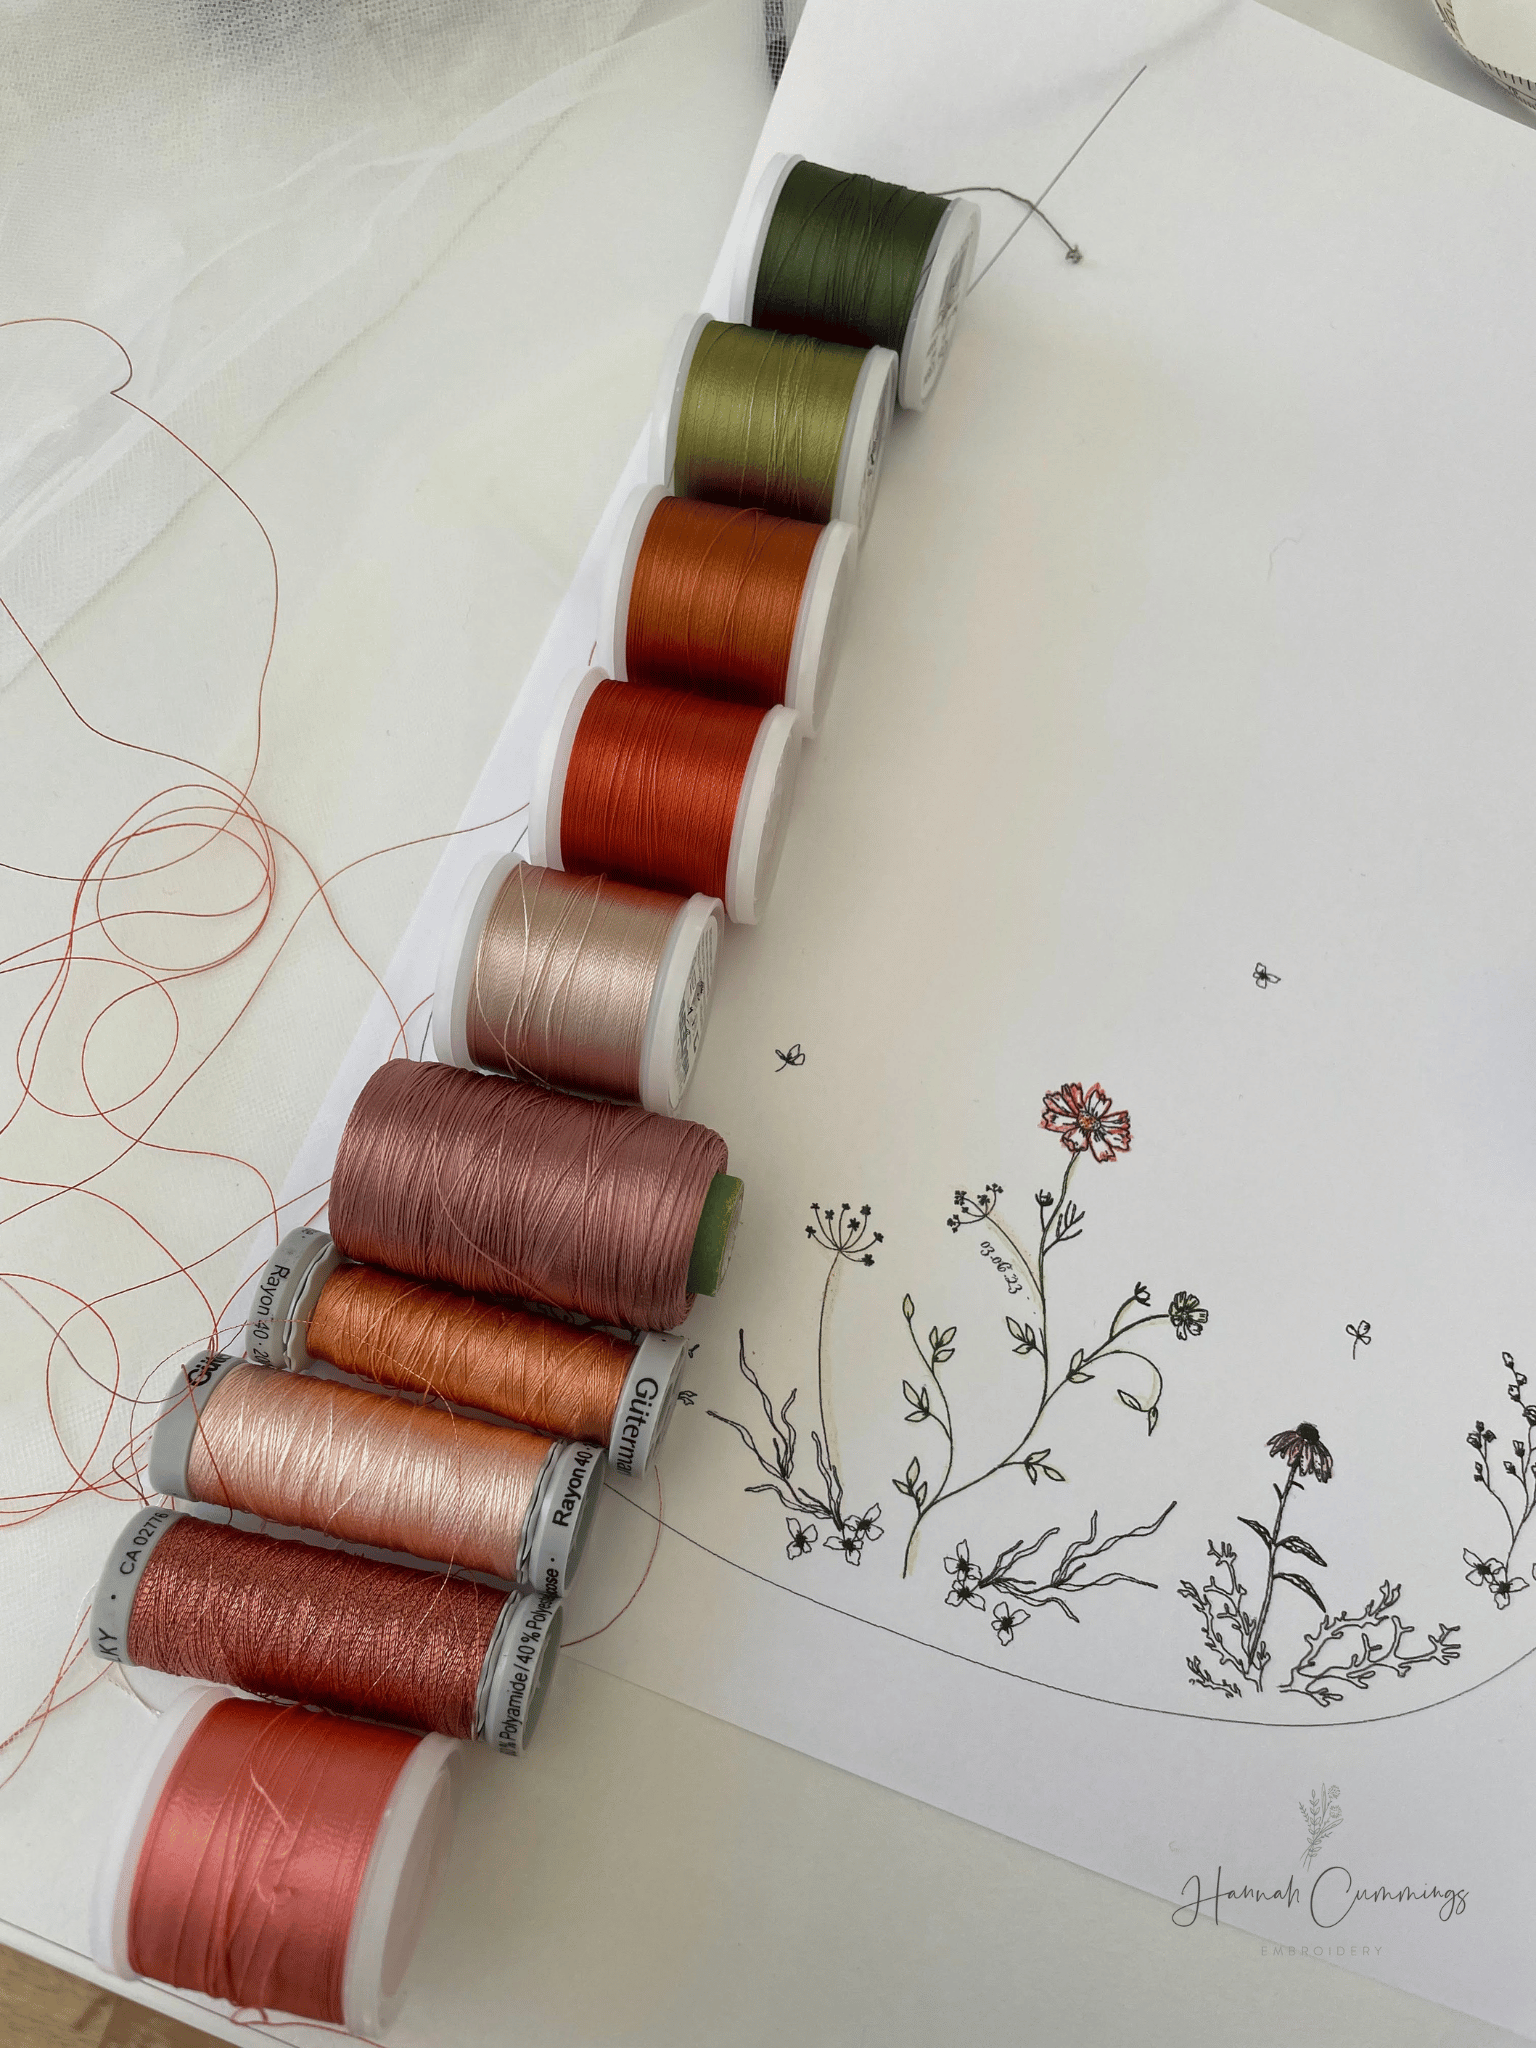  Colourful spools of thread with embroidery artwork 